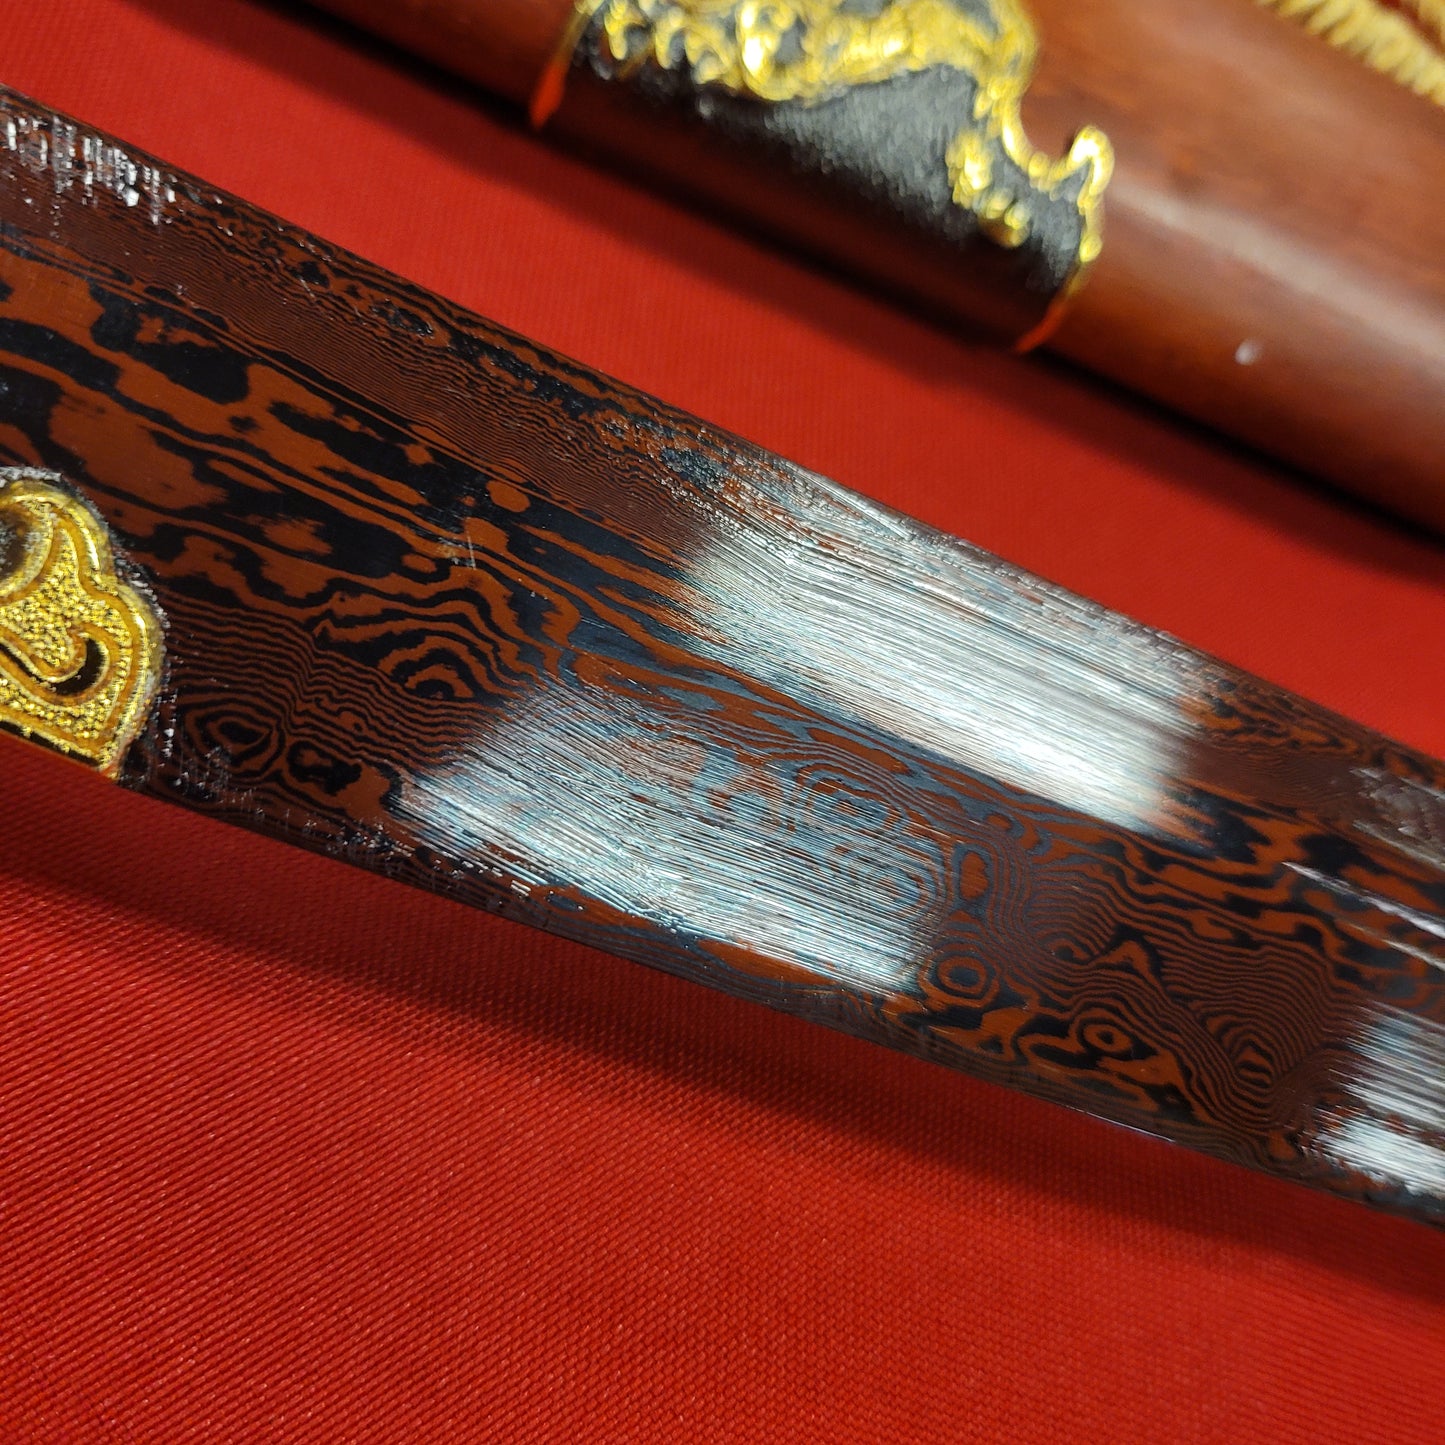 Dao, Damascus Red Steel, Qing Dynasty-style, Phoenix theme